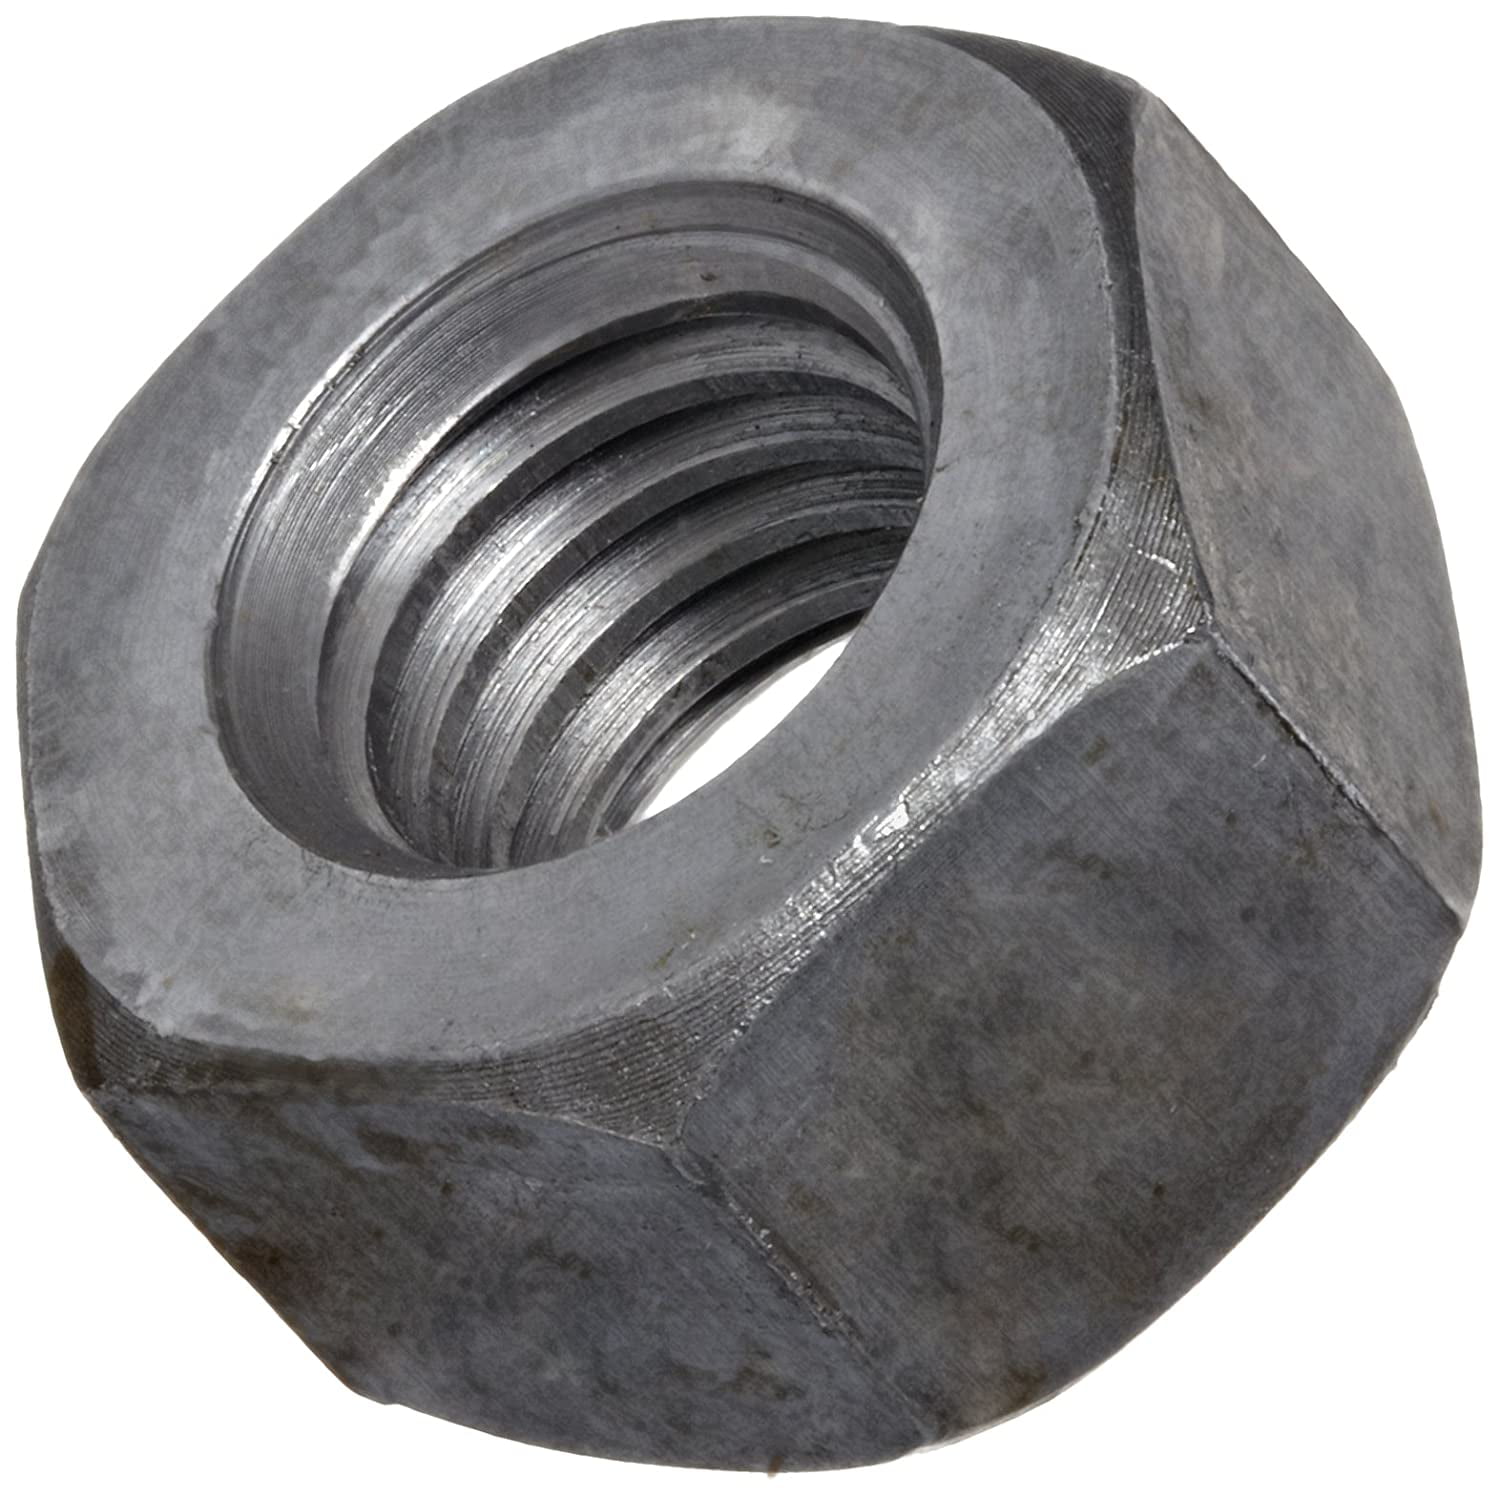 Grade 8 Steel Hex Nuts Plain Alloy Steel Finished Nuts 1/4" to 2-1/2" 